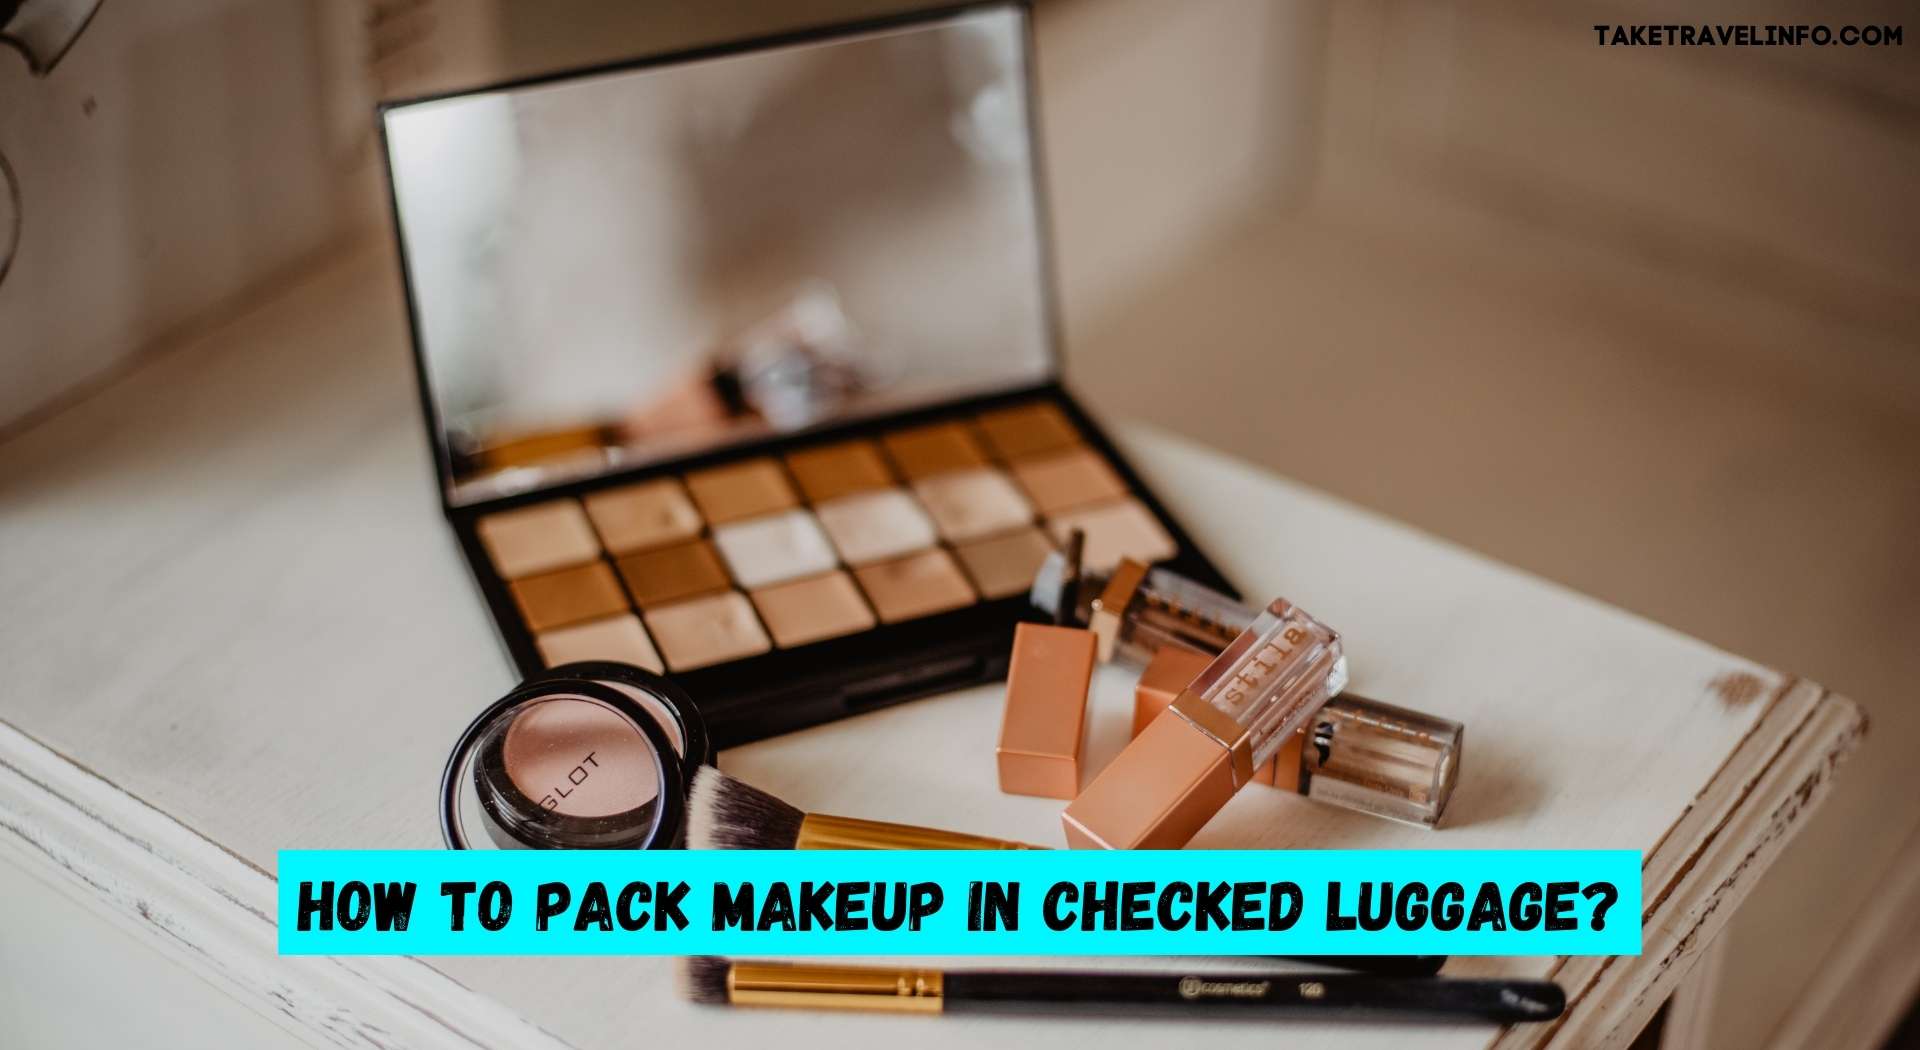 How to Pack Makeup in Checked Luggage?